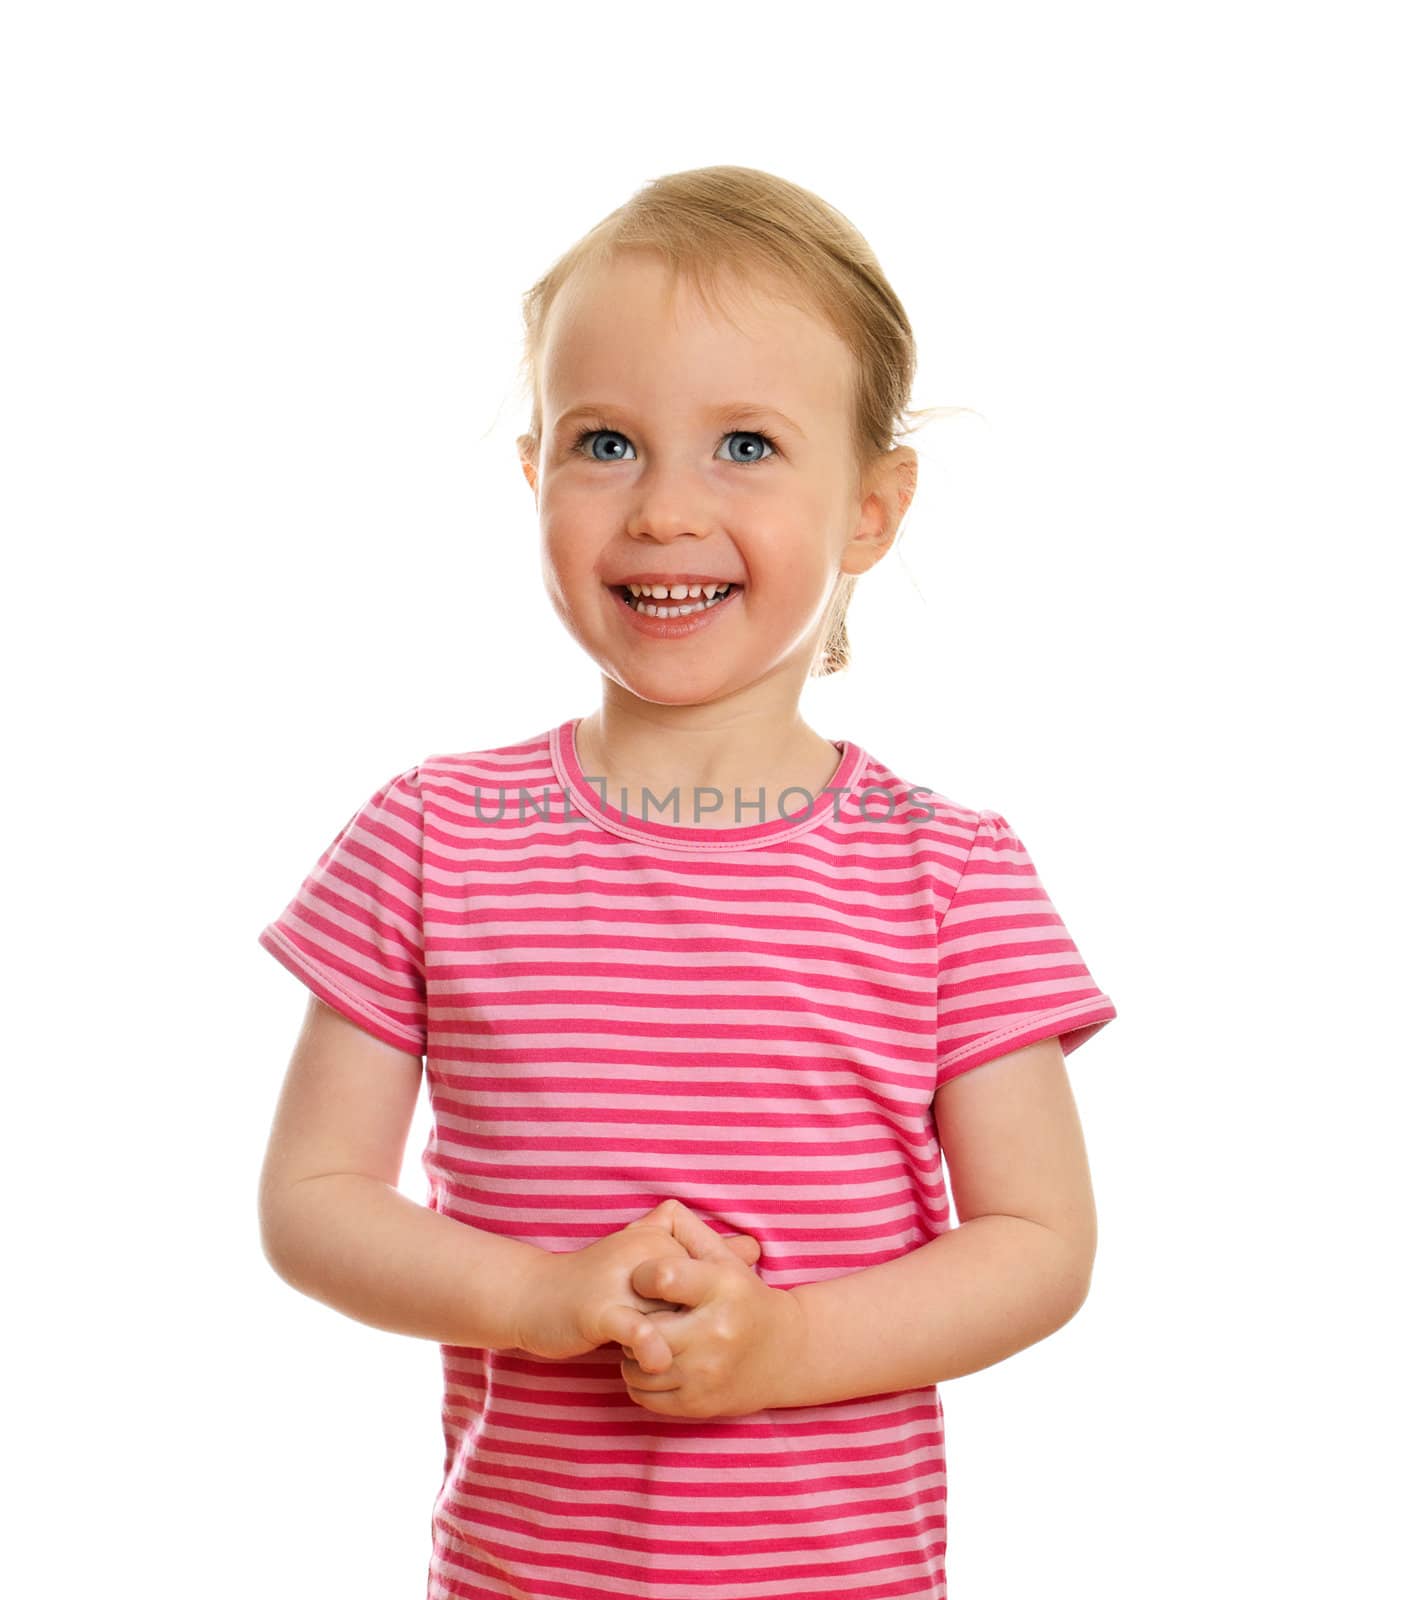 Smiling little girl portrait isolated on white background